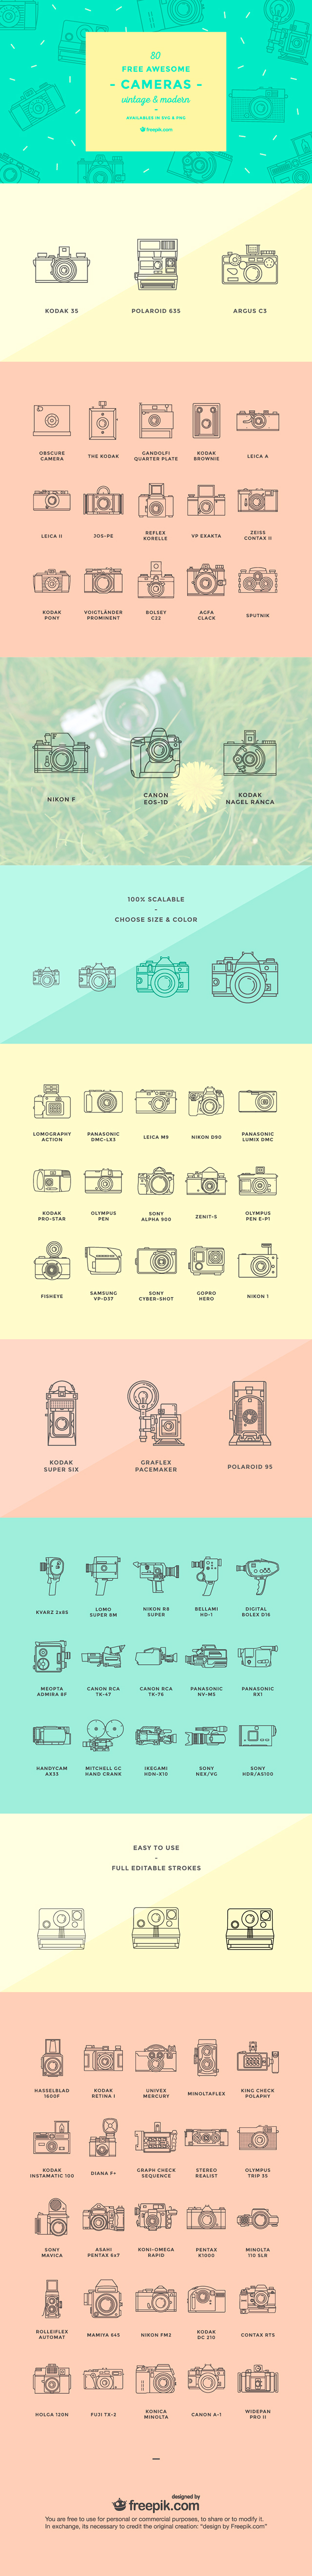 camera icon set 80 free awesome modern and vintage camera vector icons